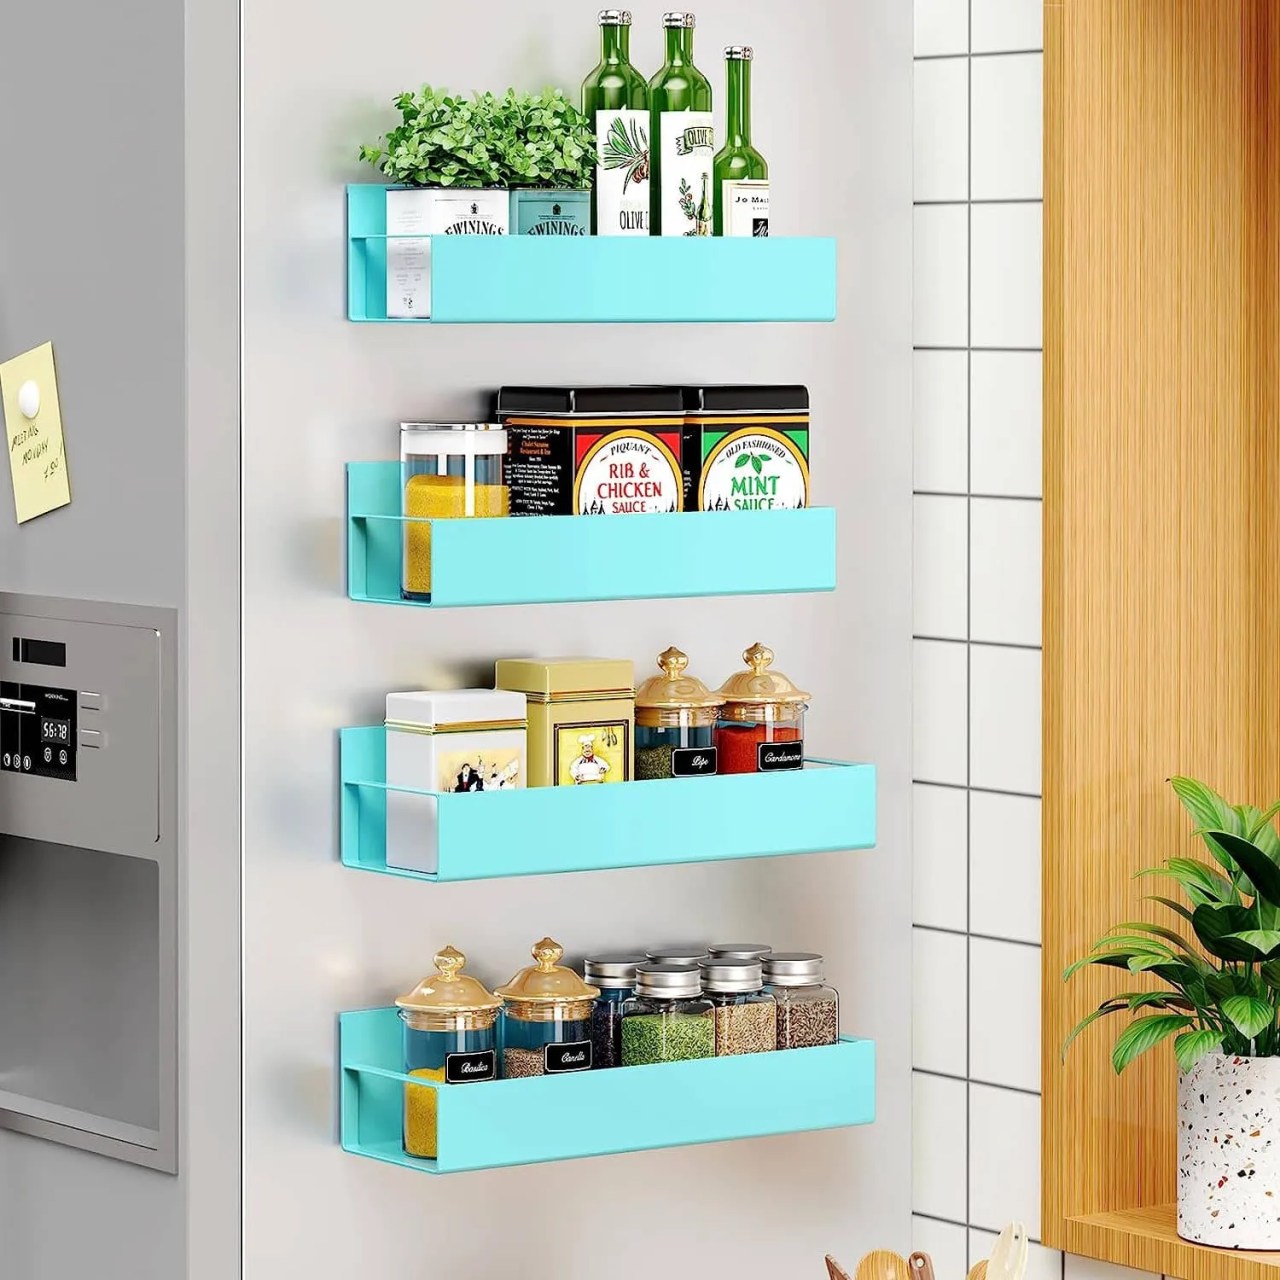 a magnetic blue shelf to hold spices